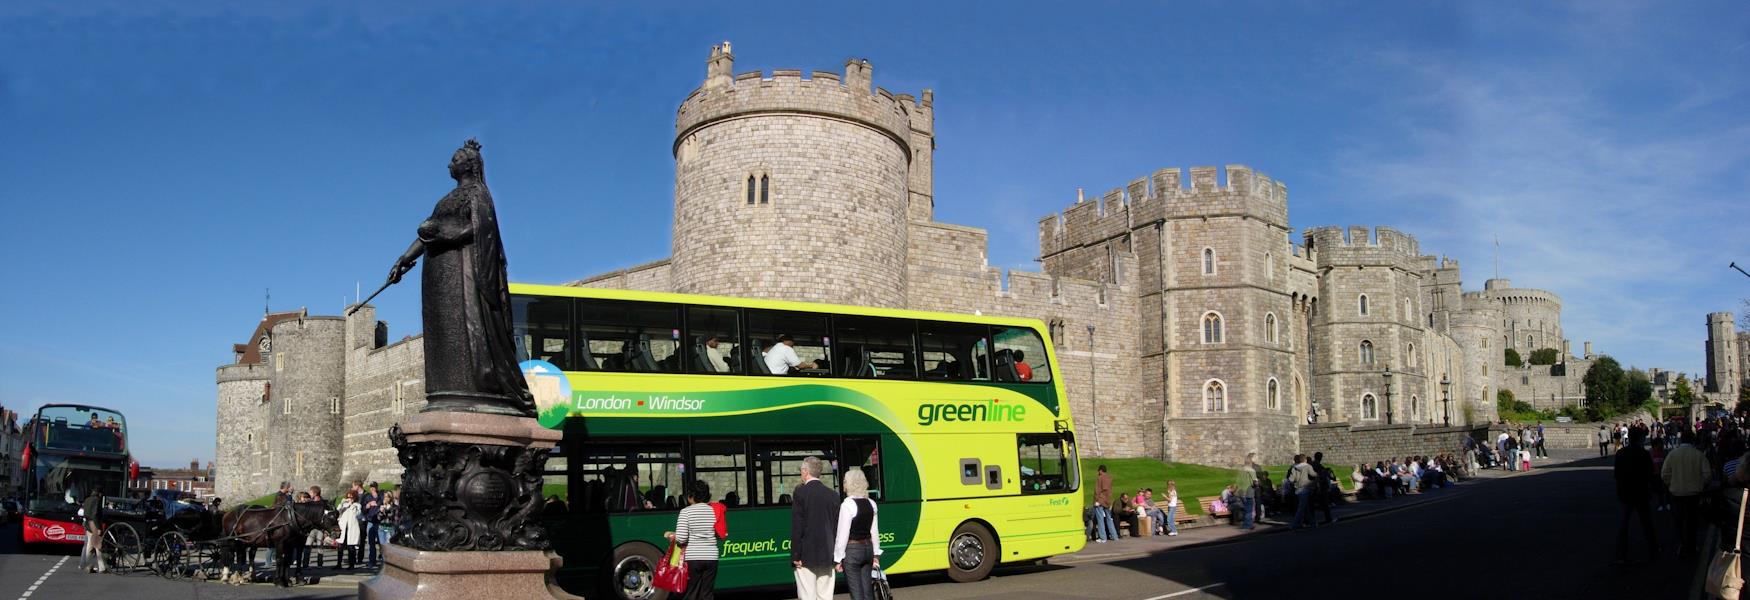 702 Greenline Bus from London to Windsor